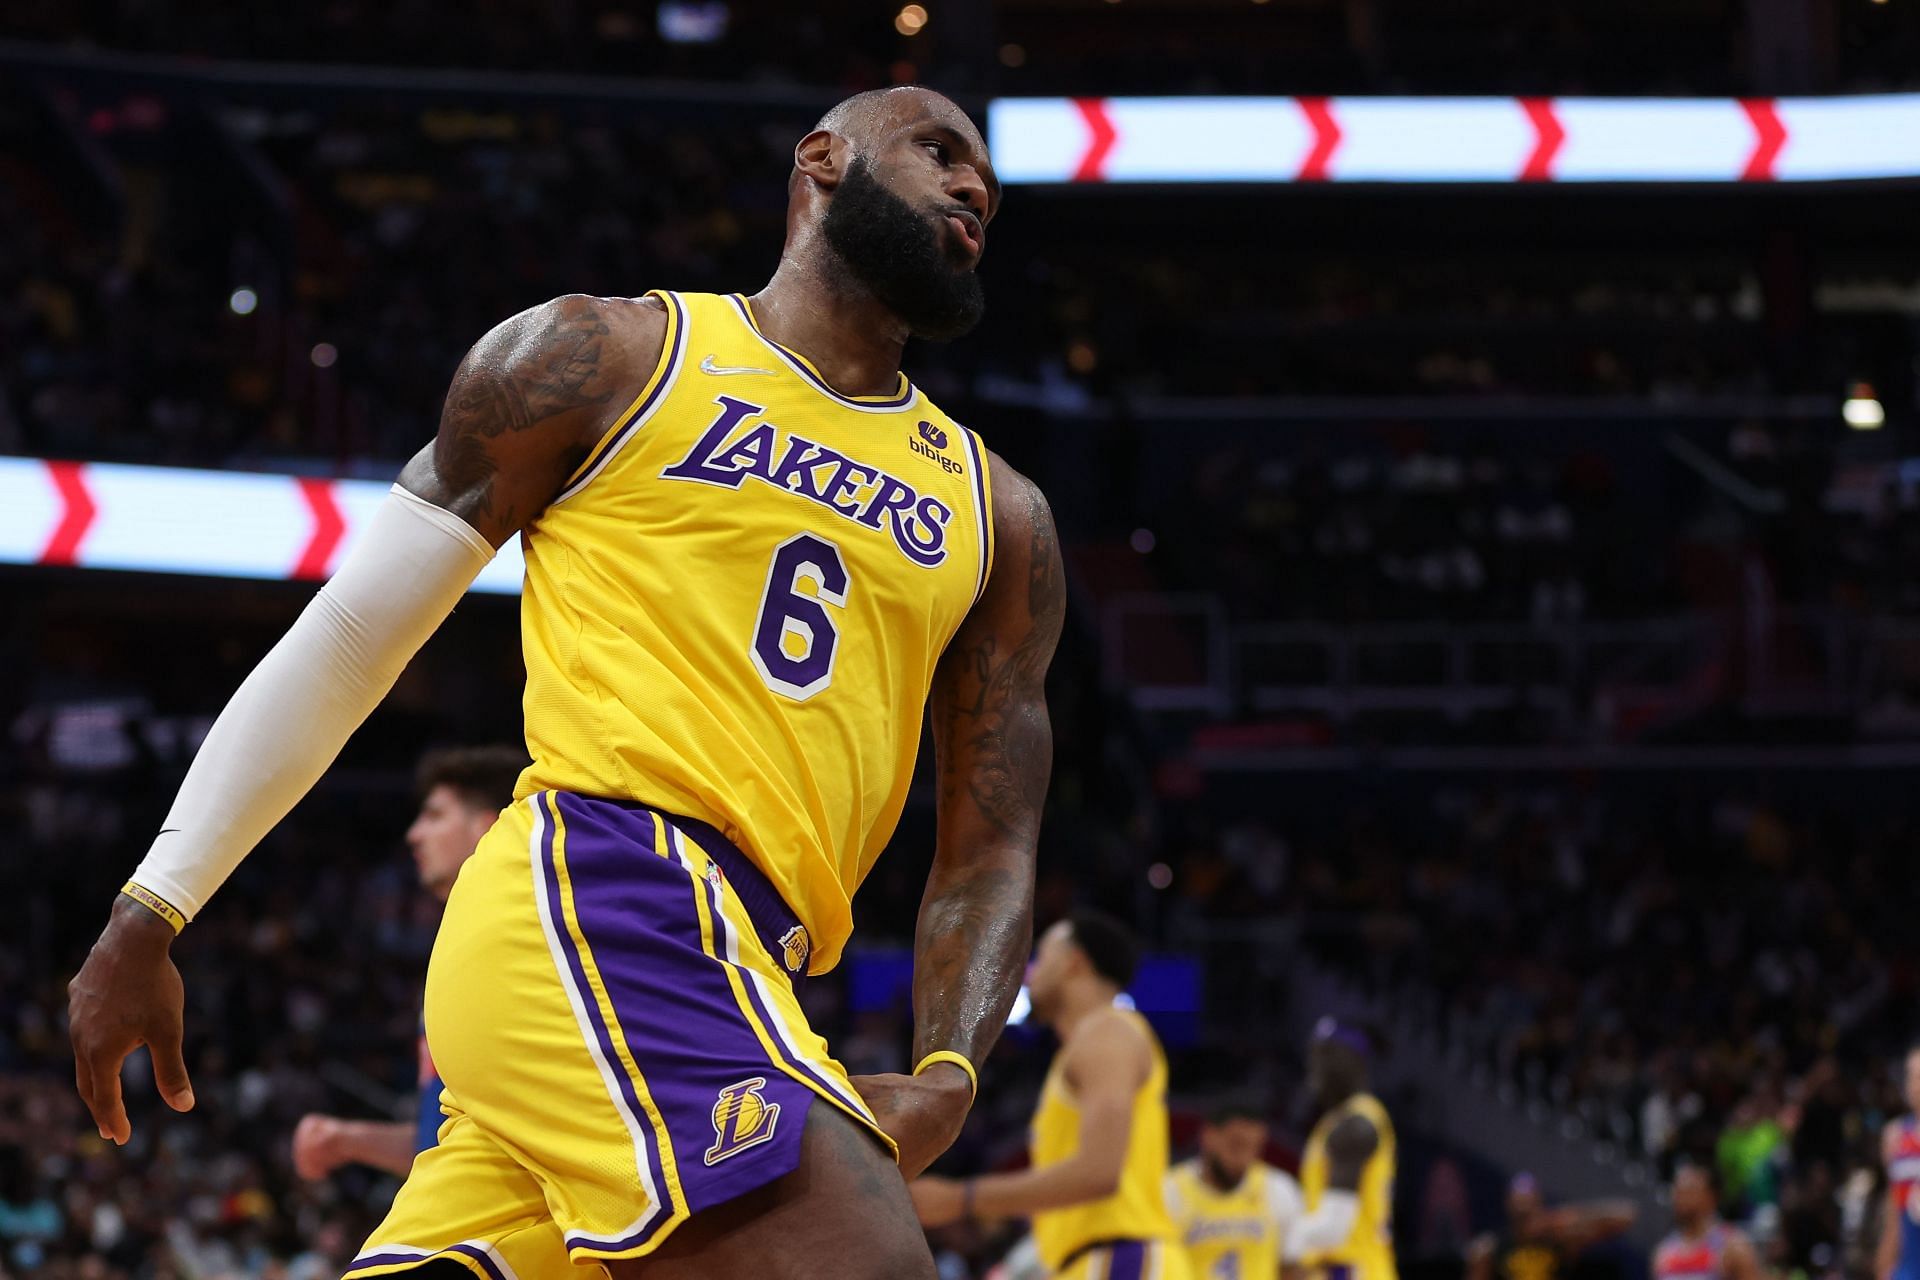 LeBron James of the LA Lakers reacts after shooting a basket against the Washington Wizards during the first half at Capital One Arena on Saturday in Washington, D.C.